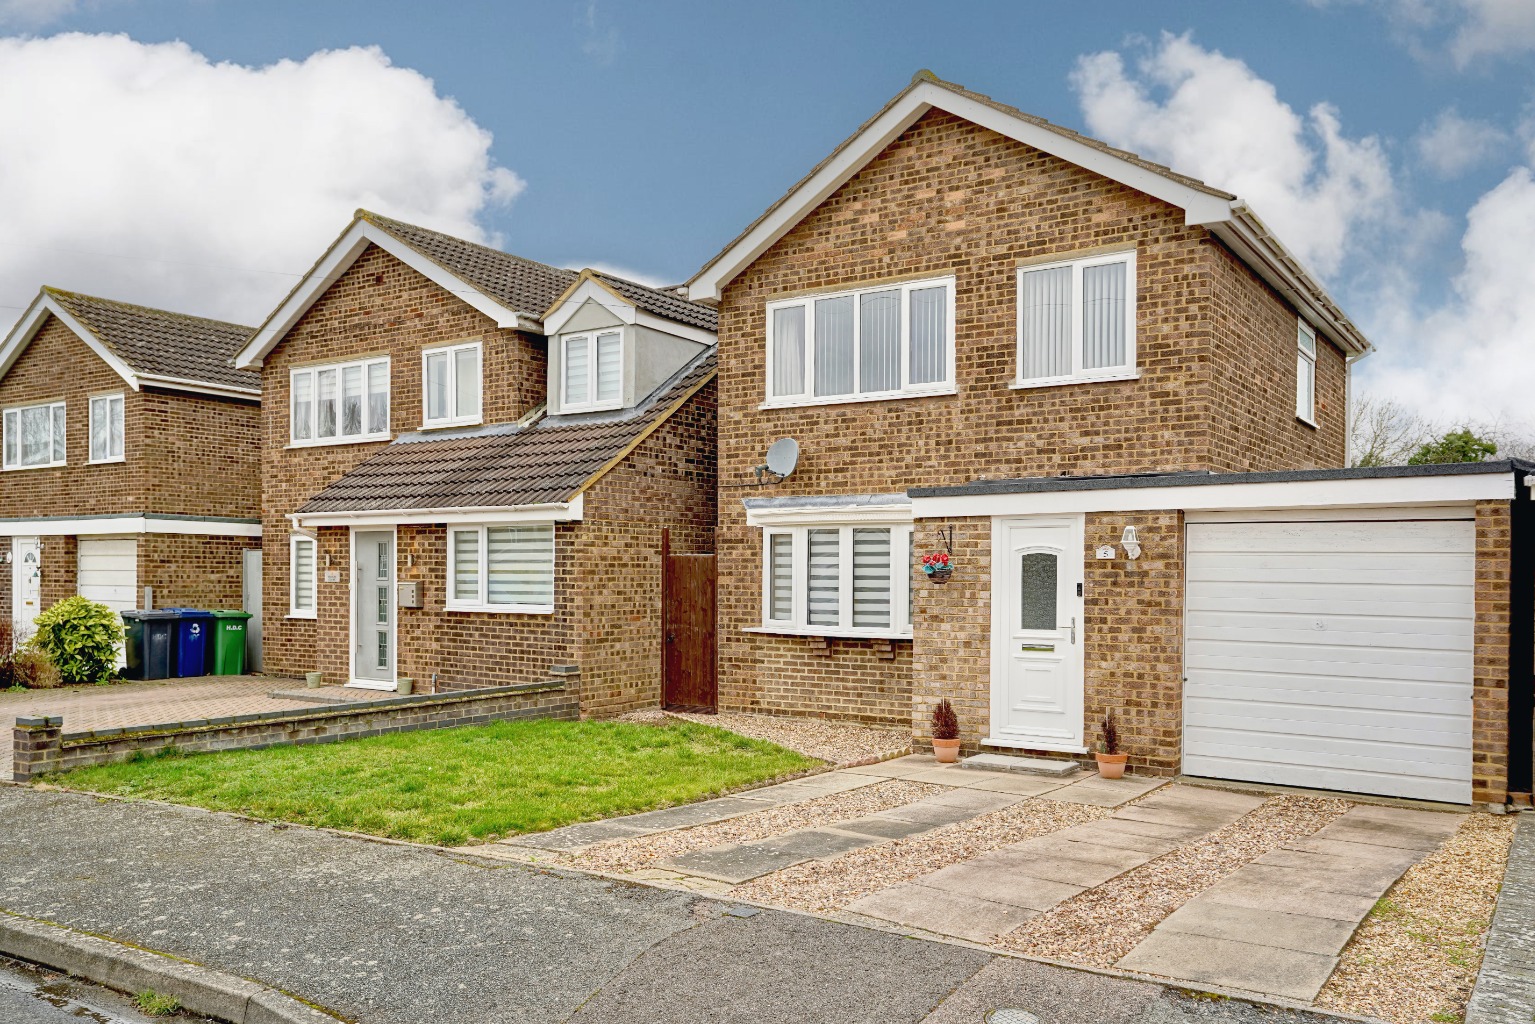 3 bed detached house for sale in Weston Court, St Neots - Property Image 1